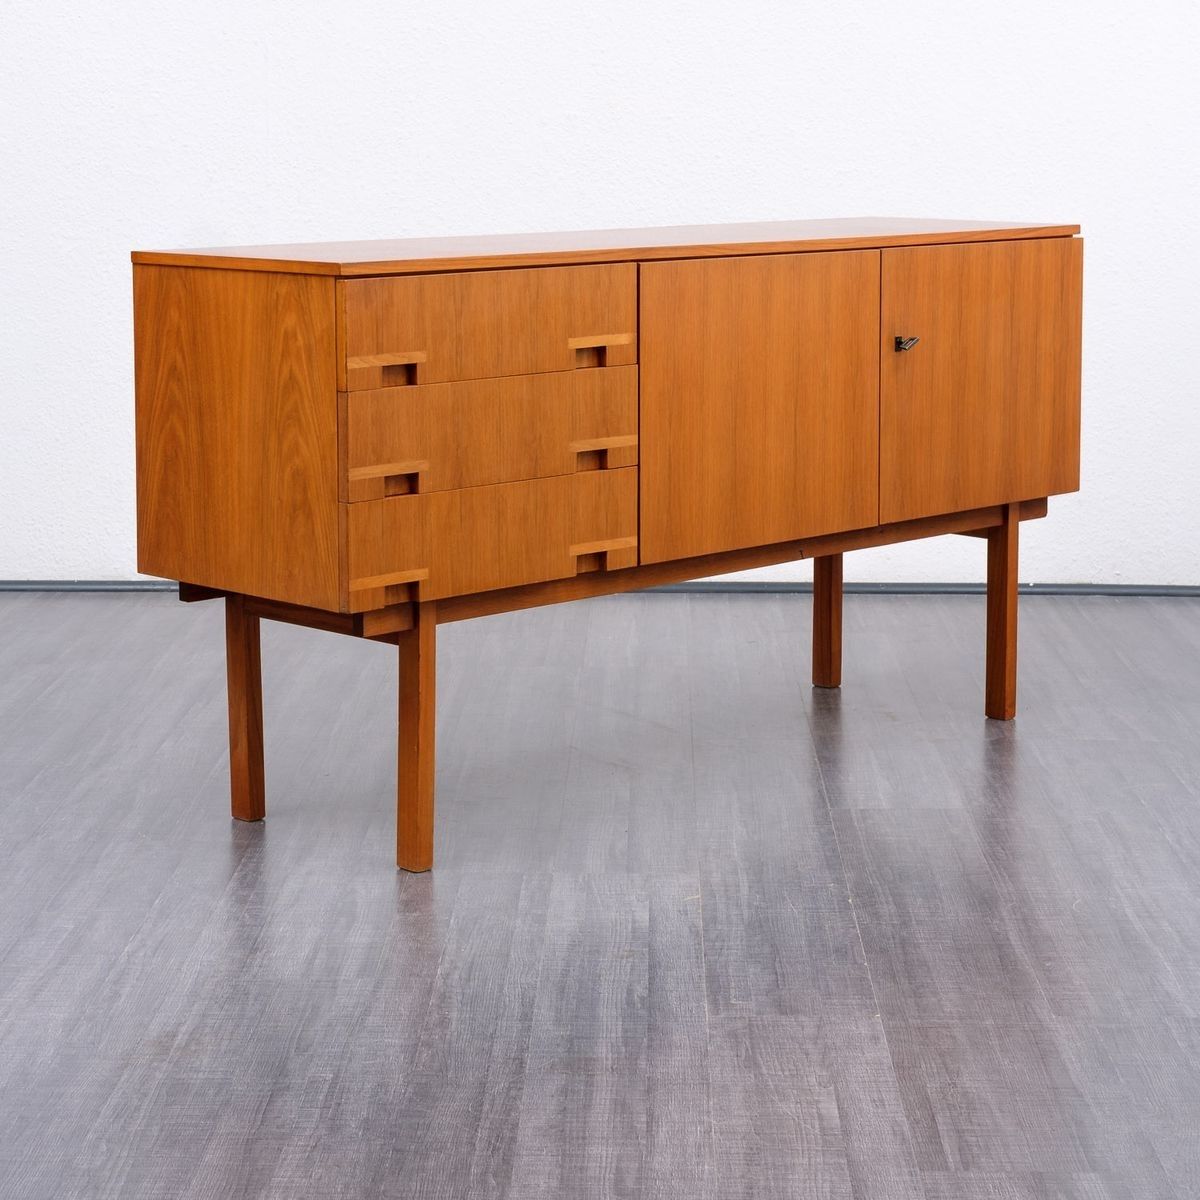 Small Walnut Sideboard, 1960s For Sale At Pamono With Regard To 2018 Walnut Small Sideboards (View 18 of 20)